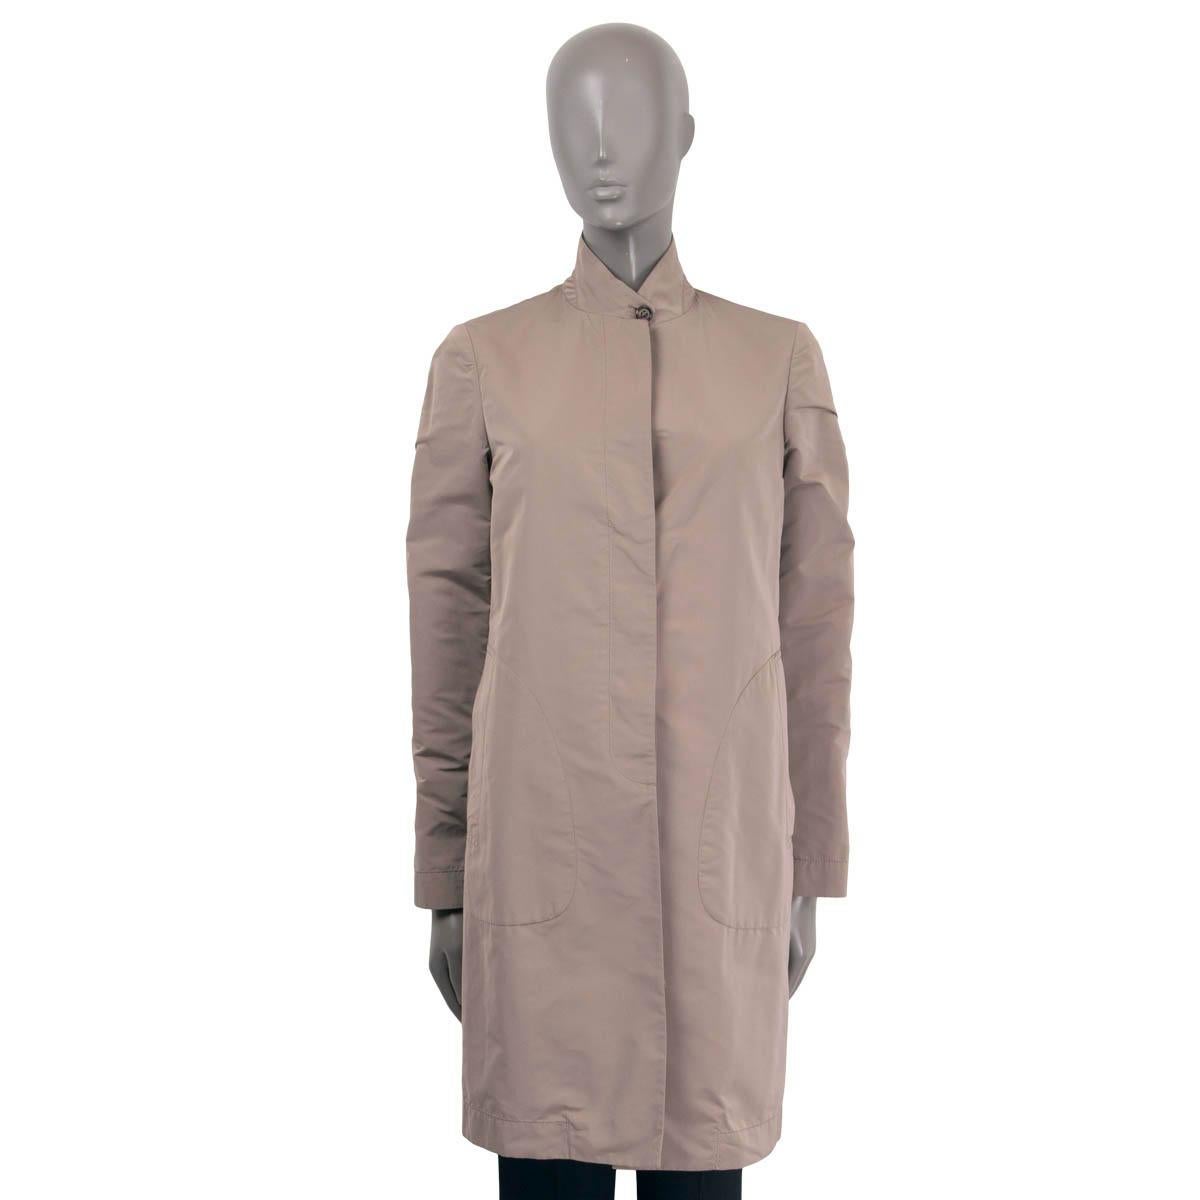 100% authentic Brunello Cucinelli layered coat in light taupe polyester (70%) and silk (30%). Comes with a thin undercoat in grey wool (94%) and elastane (6%) and features two slit pockets on the front and a high standing collar. Opens with covered